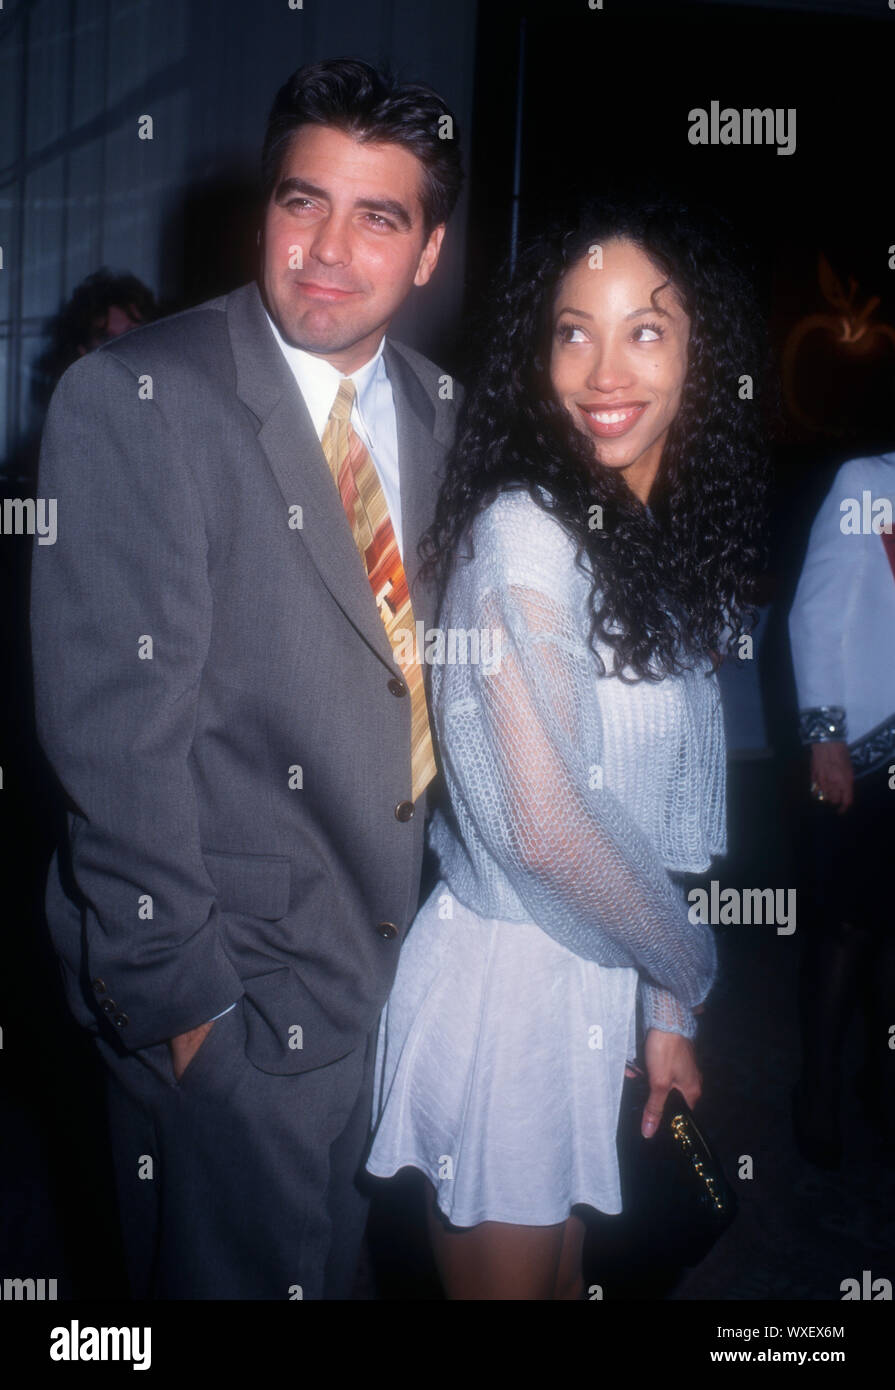 Beverly Hills, California, USA 11th December 1994 Actor George Clooney and actress Kimberly Russell attend the Hollywood Women's Press Club's 54th Annual Golden Apple Awards on December 11, 1994 at Beverly Hilton Hotel in Beverly Hills, California, USA.  Photo by Barry King/Alamy Stock Photo Stock Photo